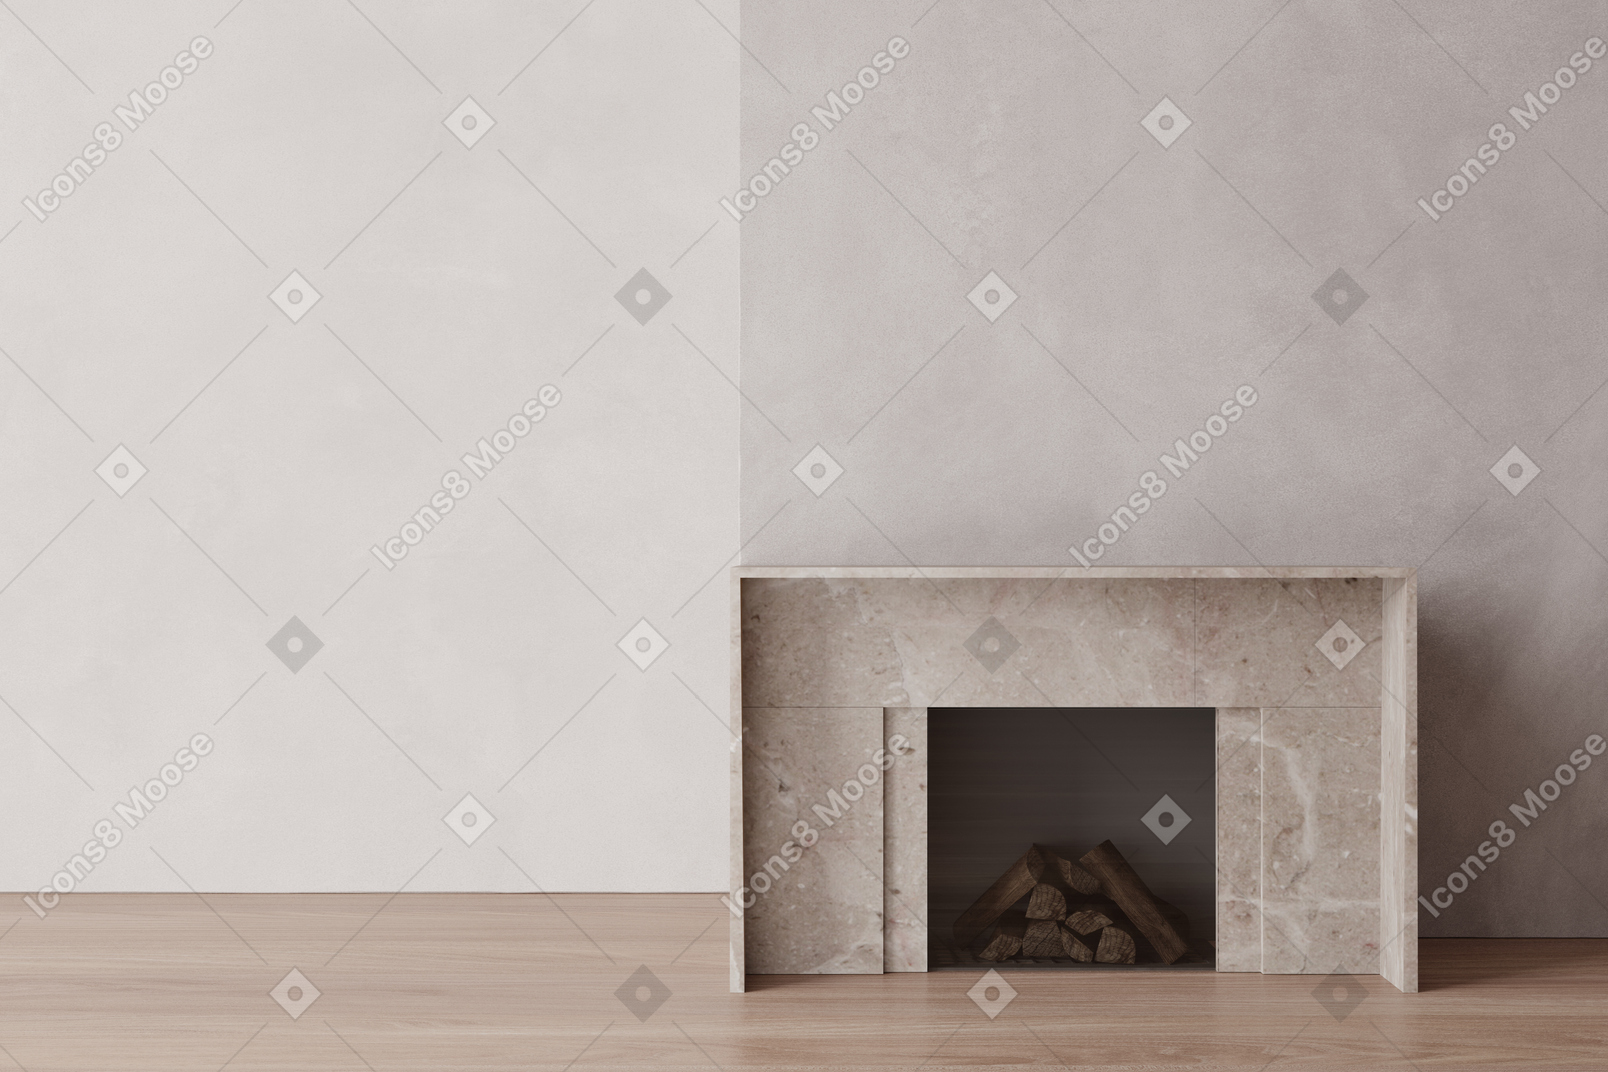 Background of room with fireplace